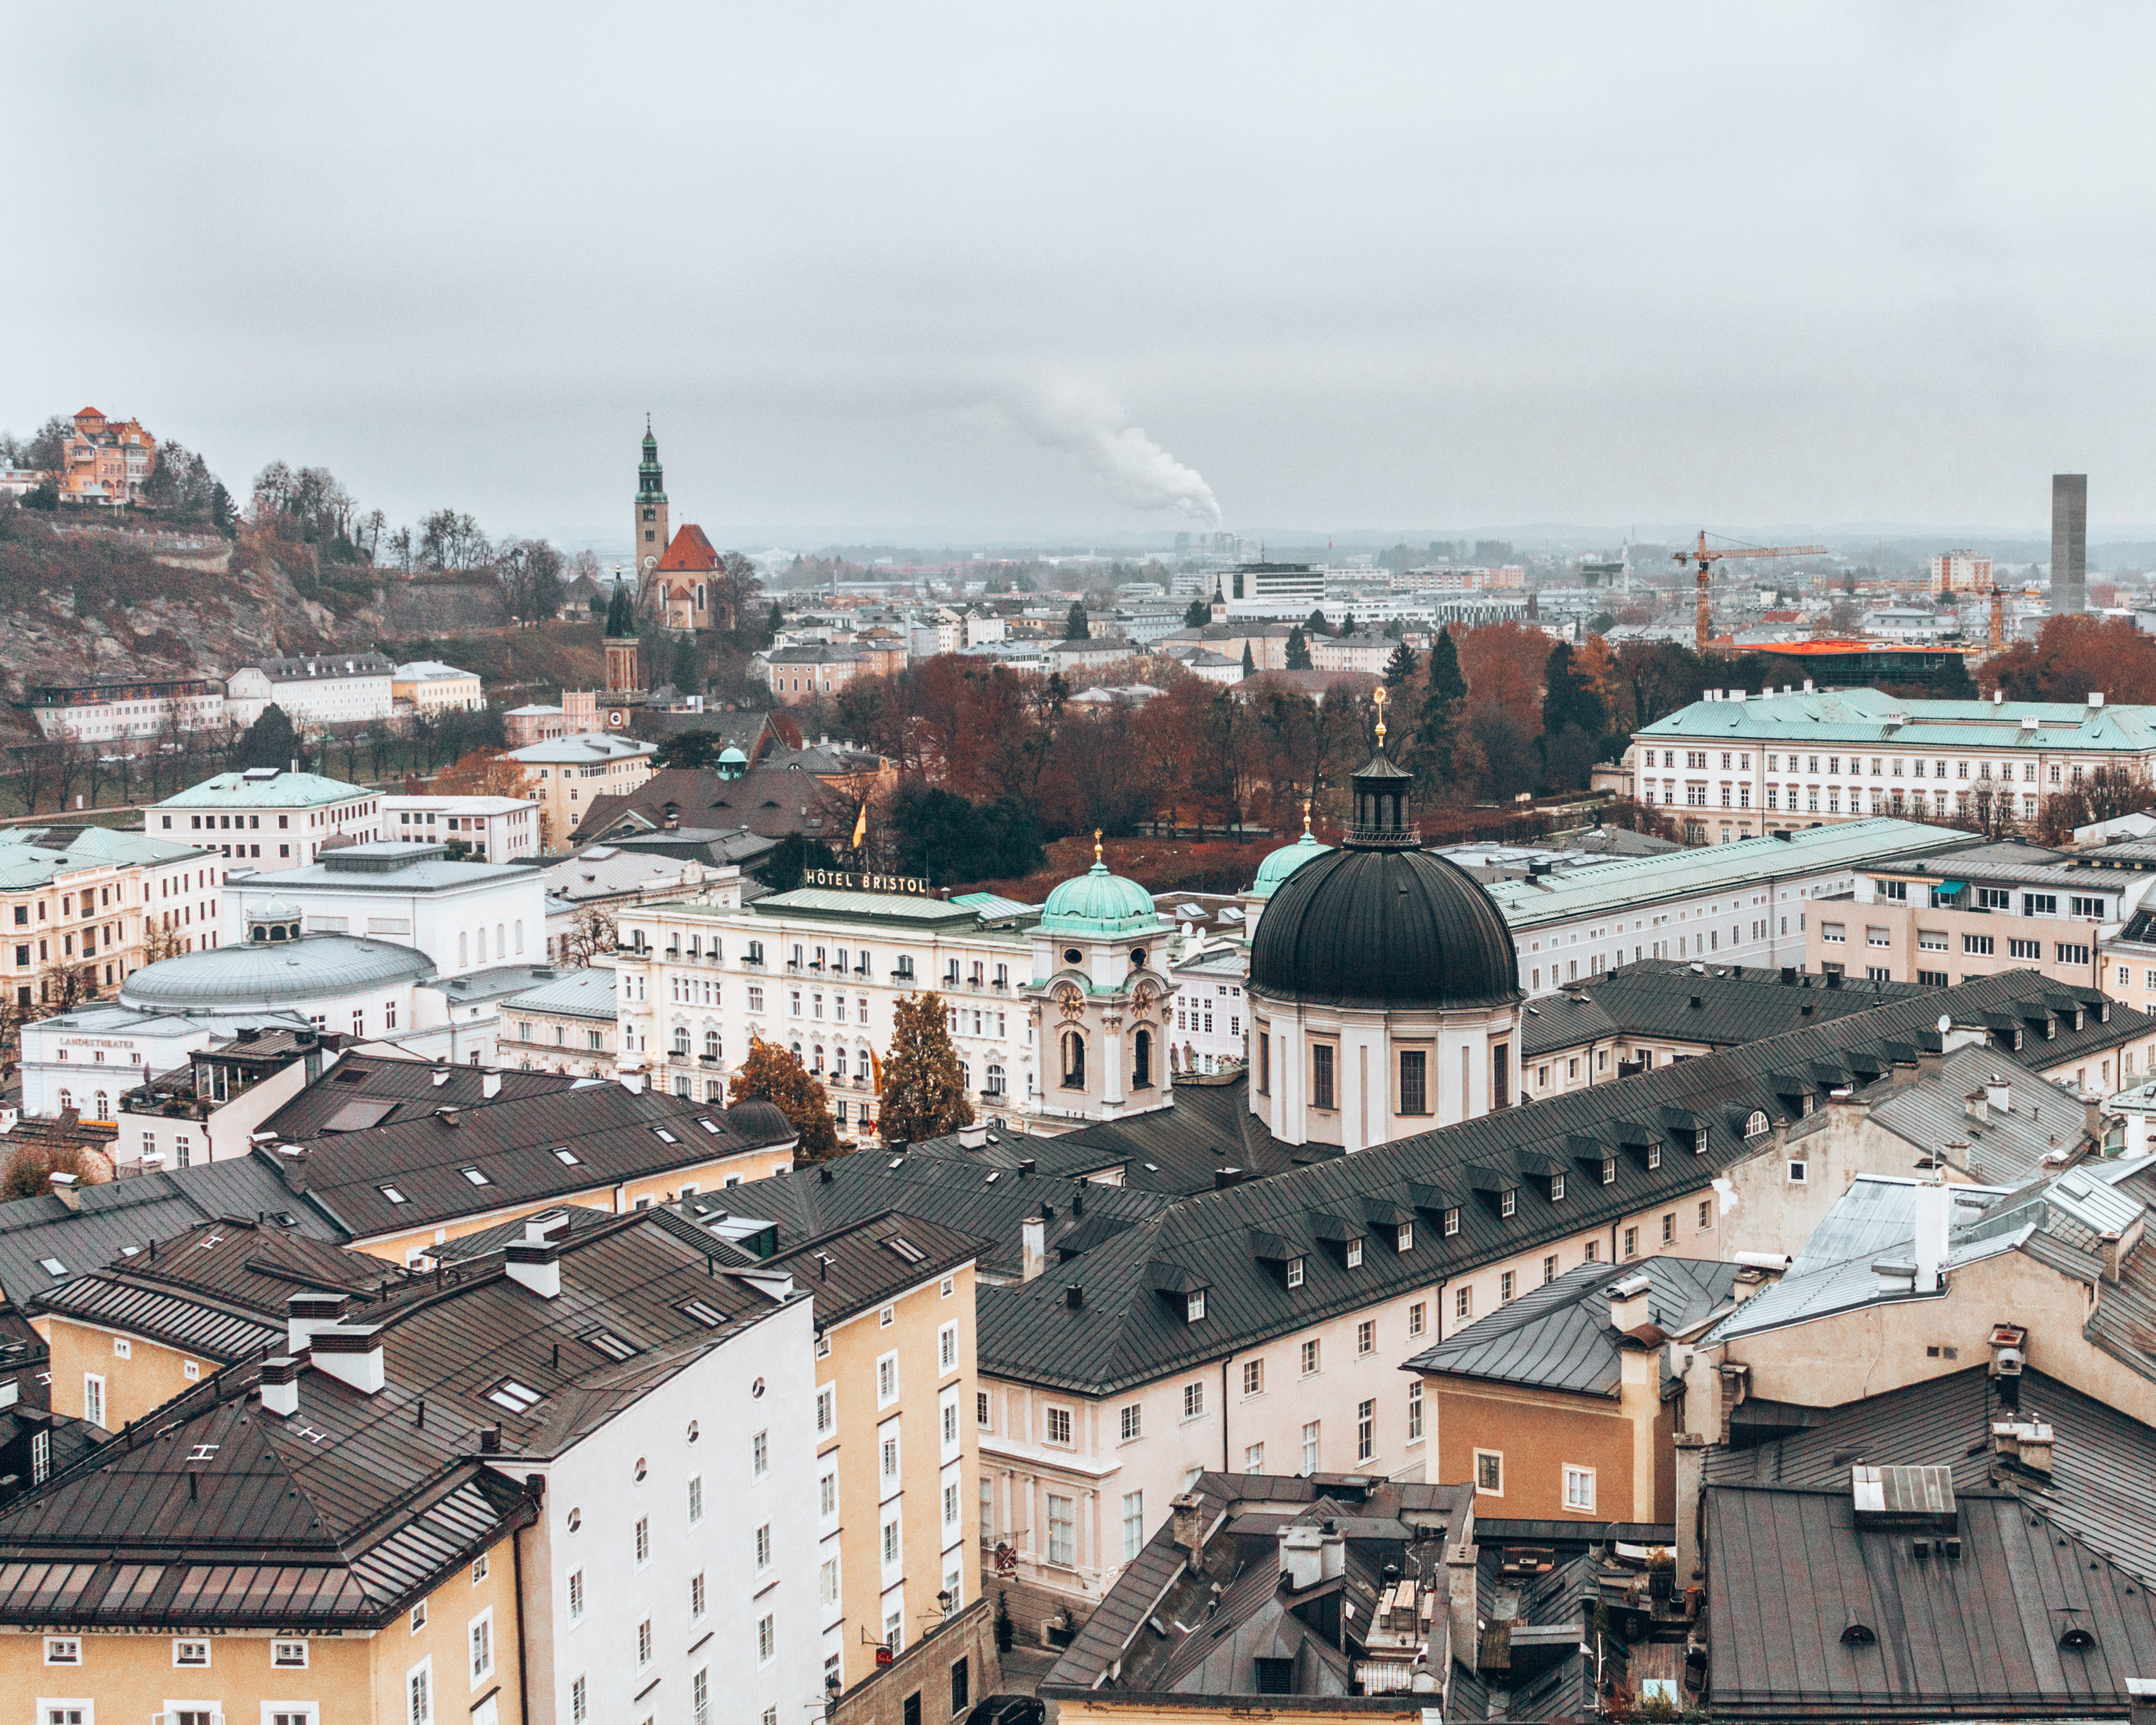 The cityscape of Salzburg, Austria. One of the best things to do in Salzburg